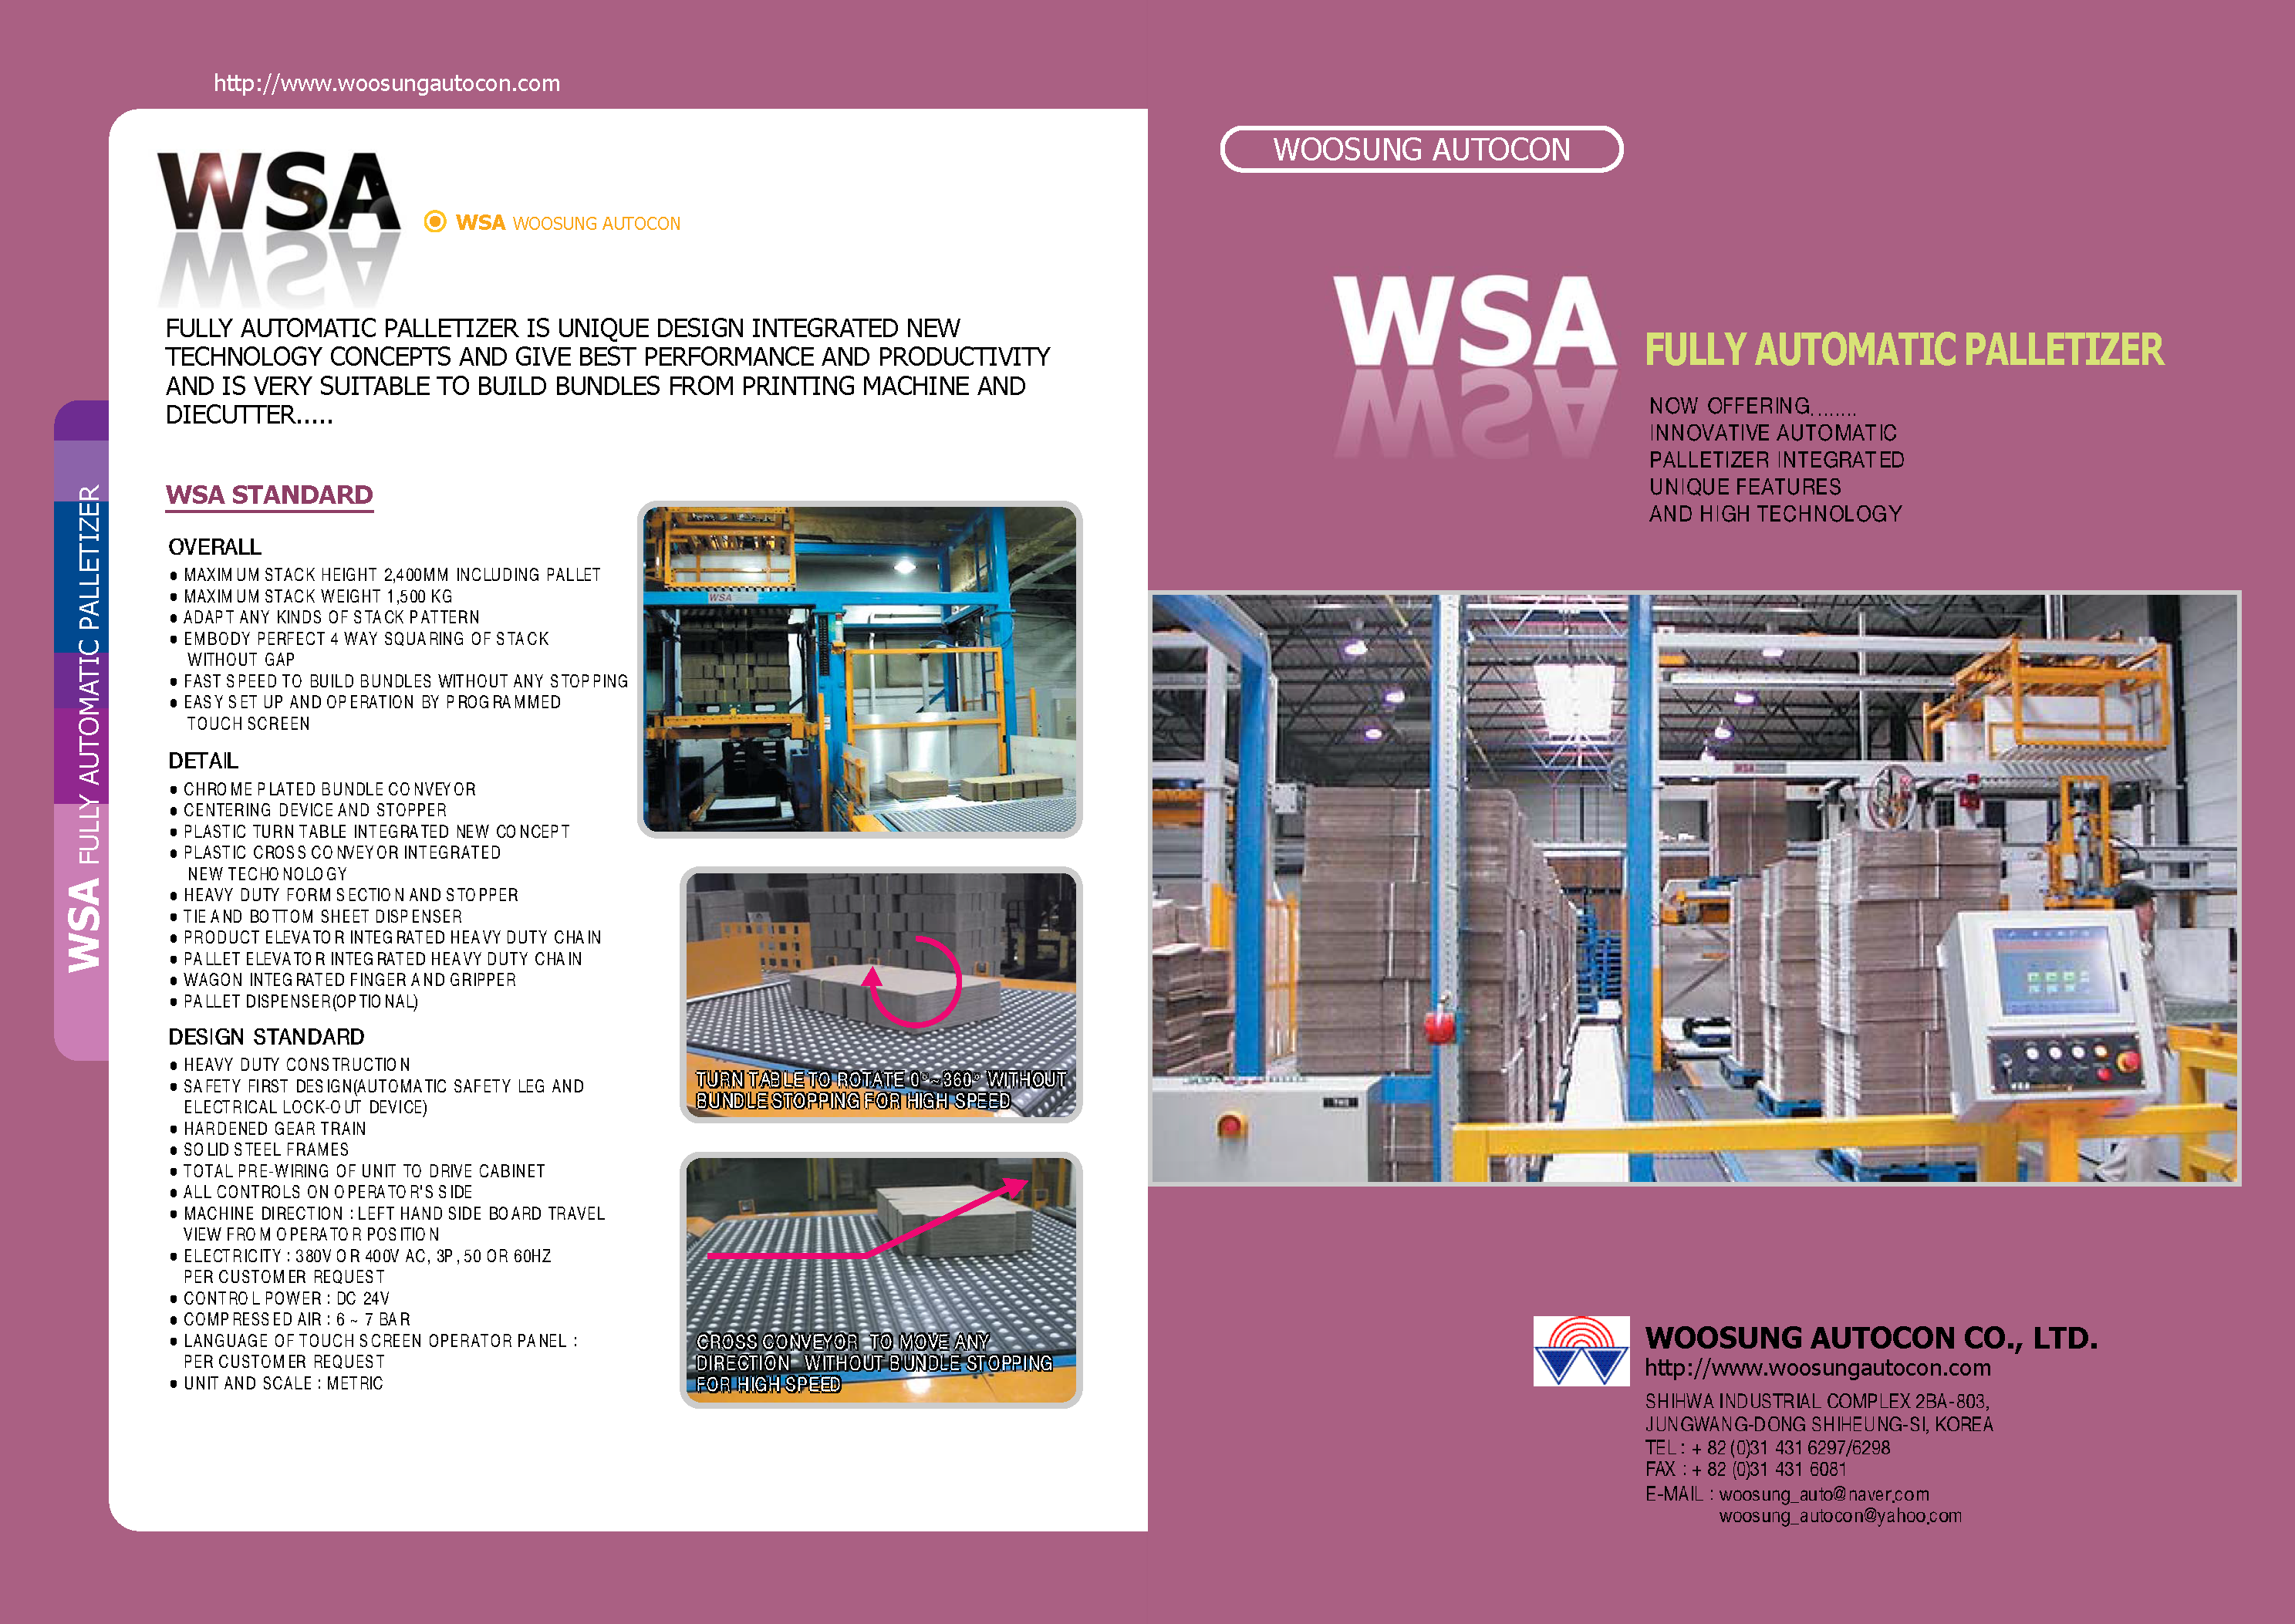 Learn more about WSA Load Formers and Palletizers in their brochure 